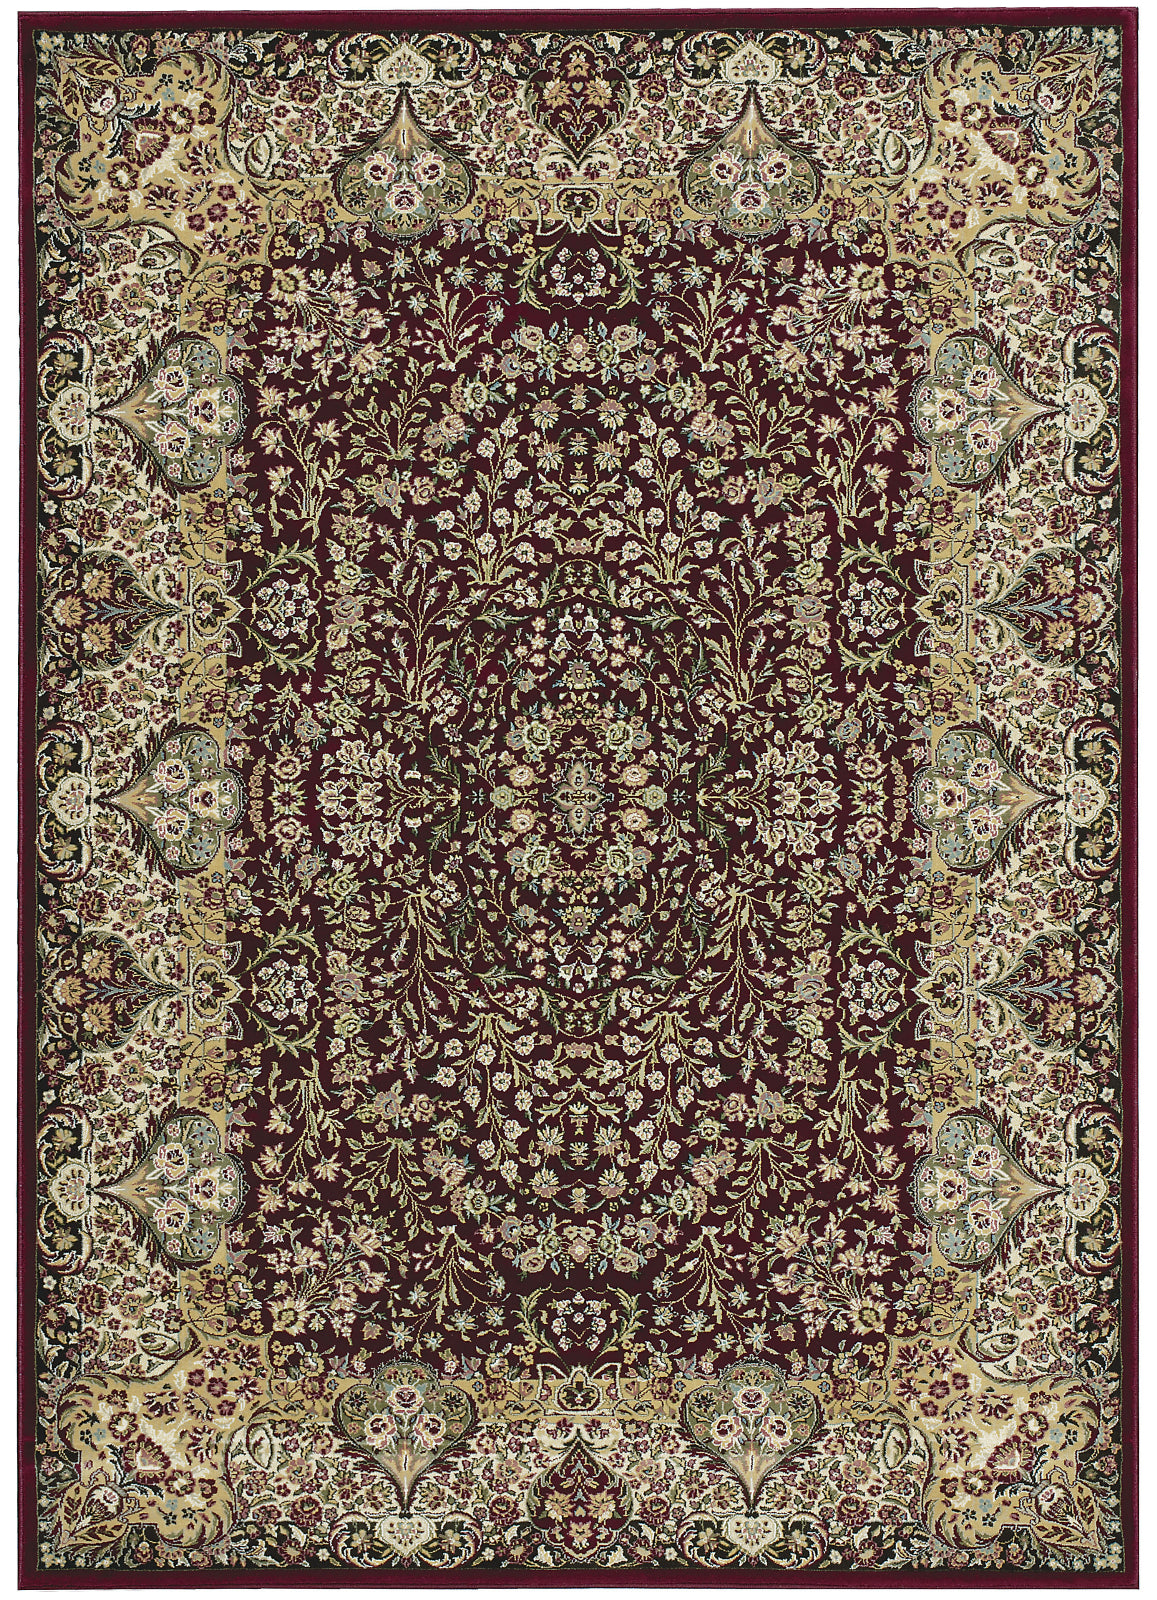 Nourison Antiquities ANT05 Stately Empire Burgundy Area Rug by Kathy Ireland main image